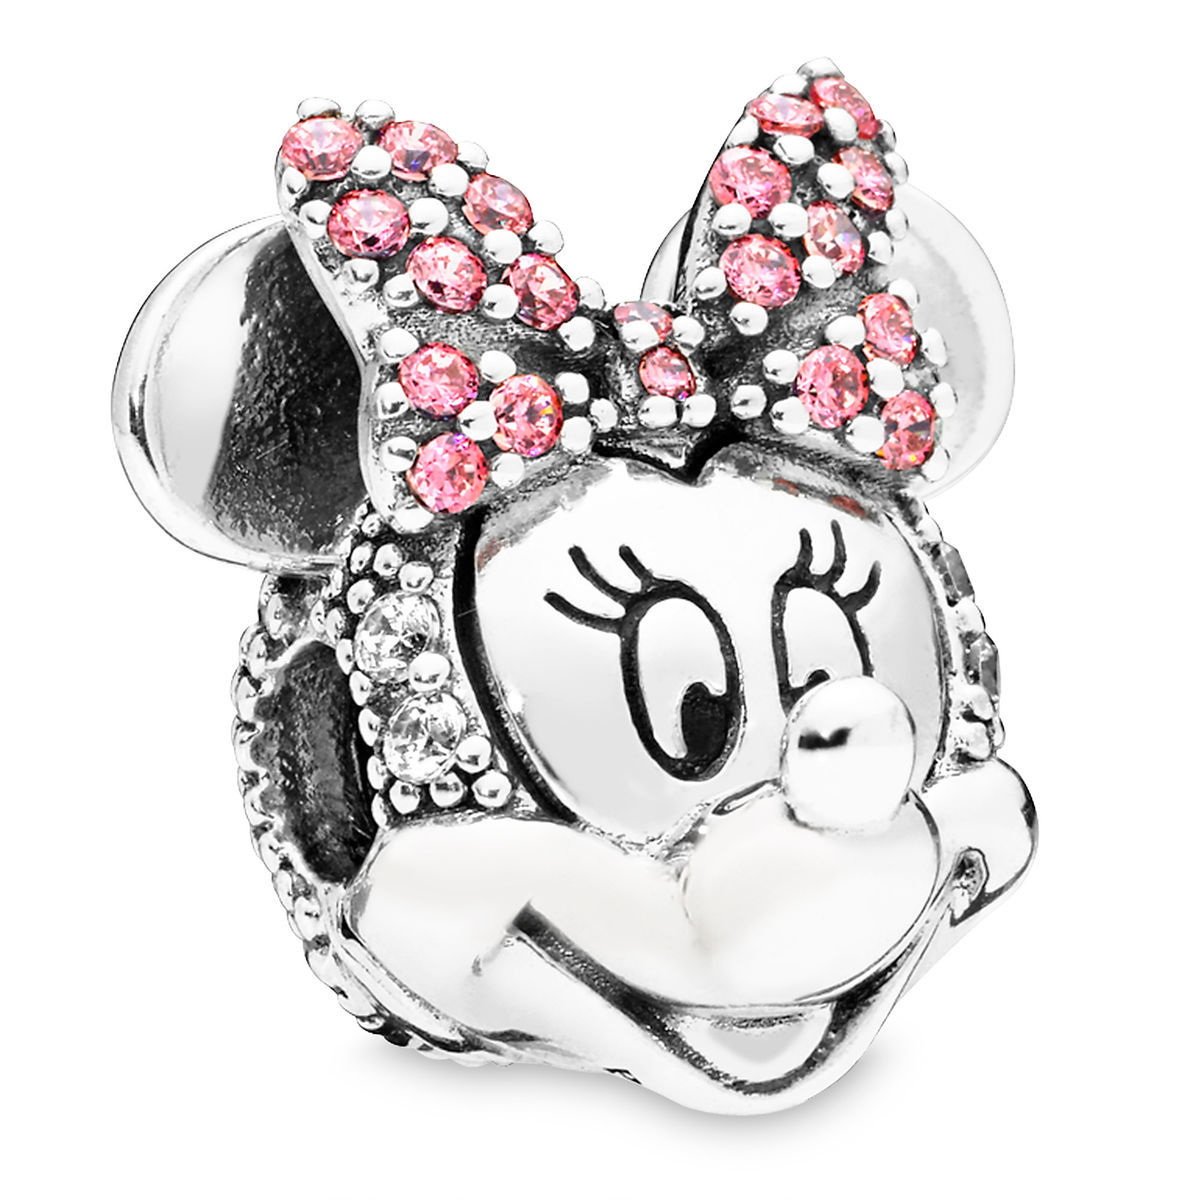 New Disney PANDORA Charms Out Now